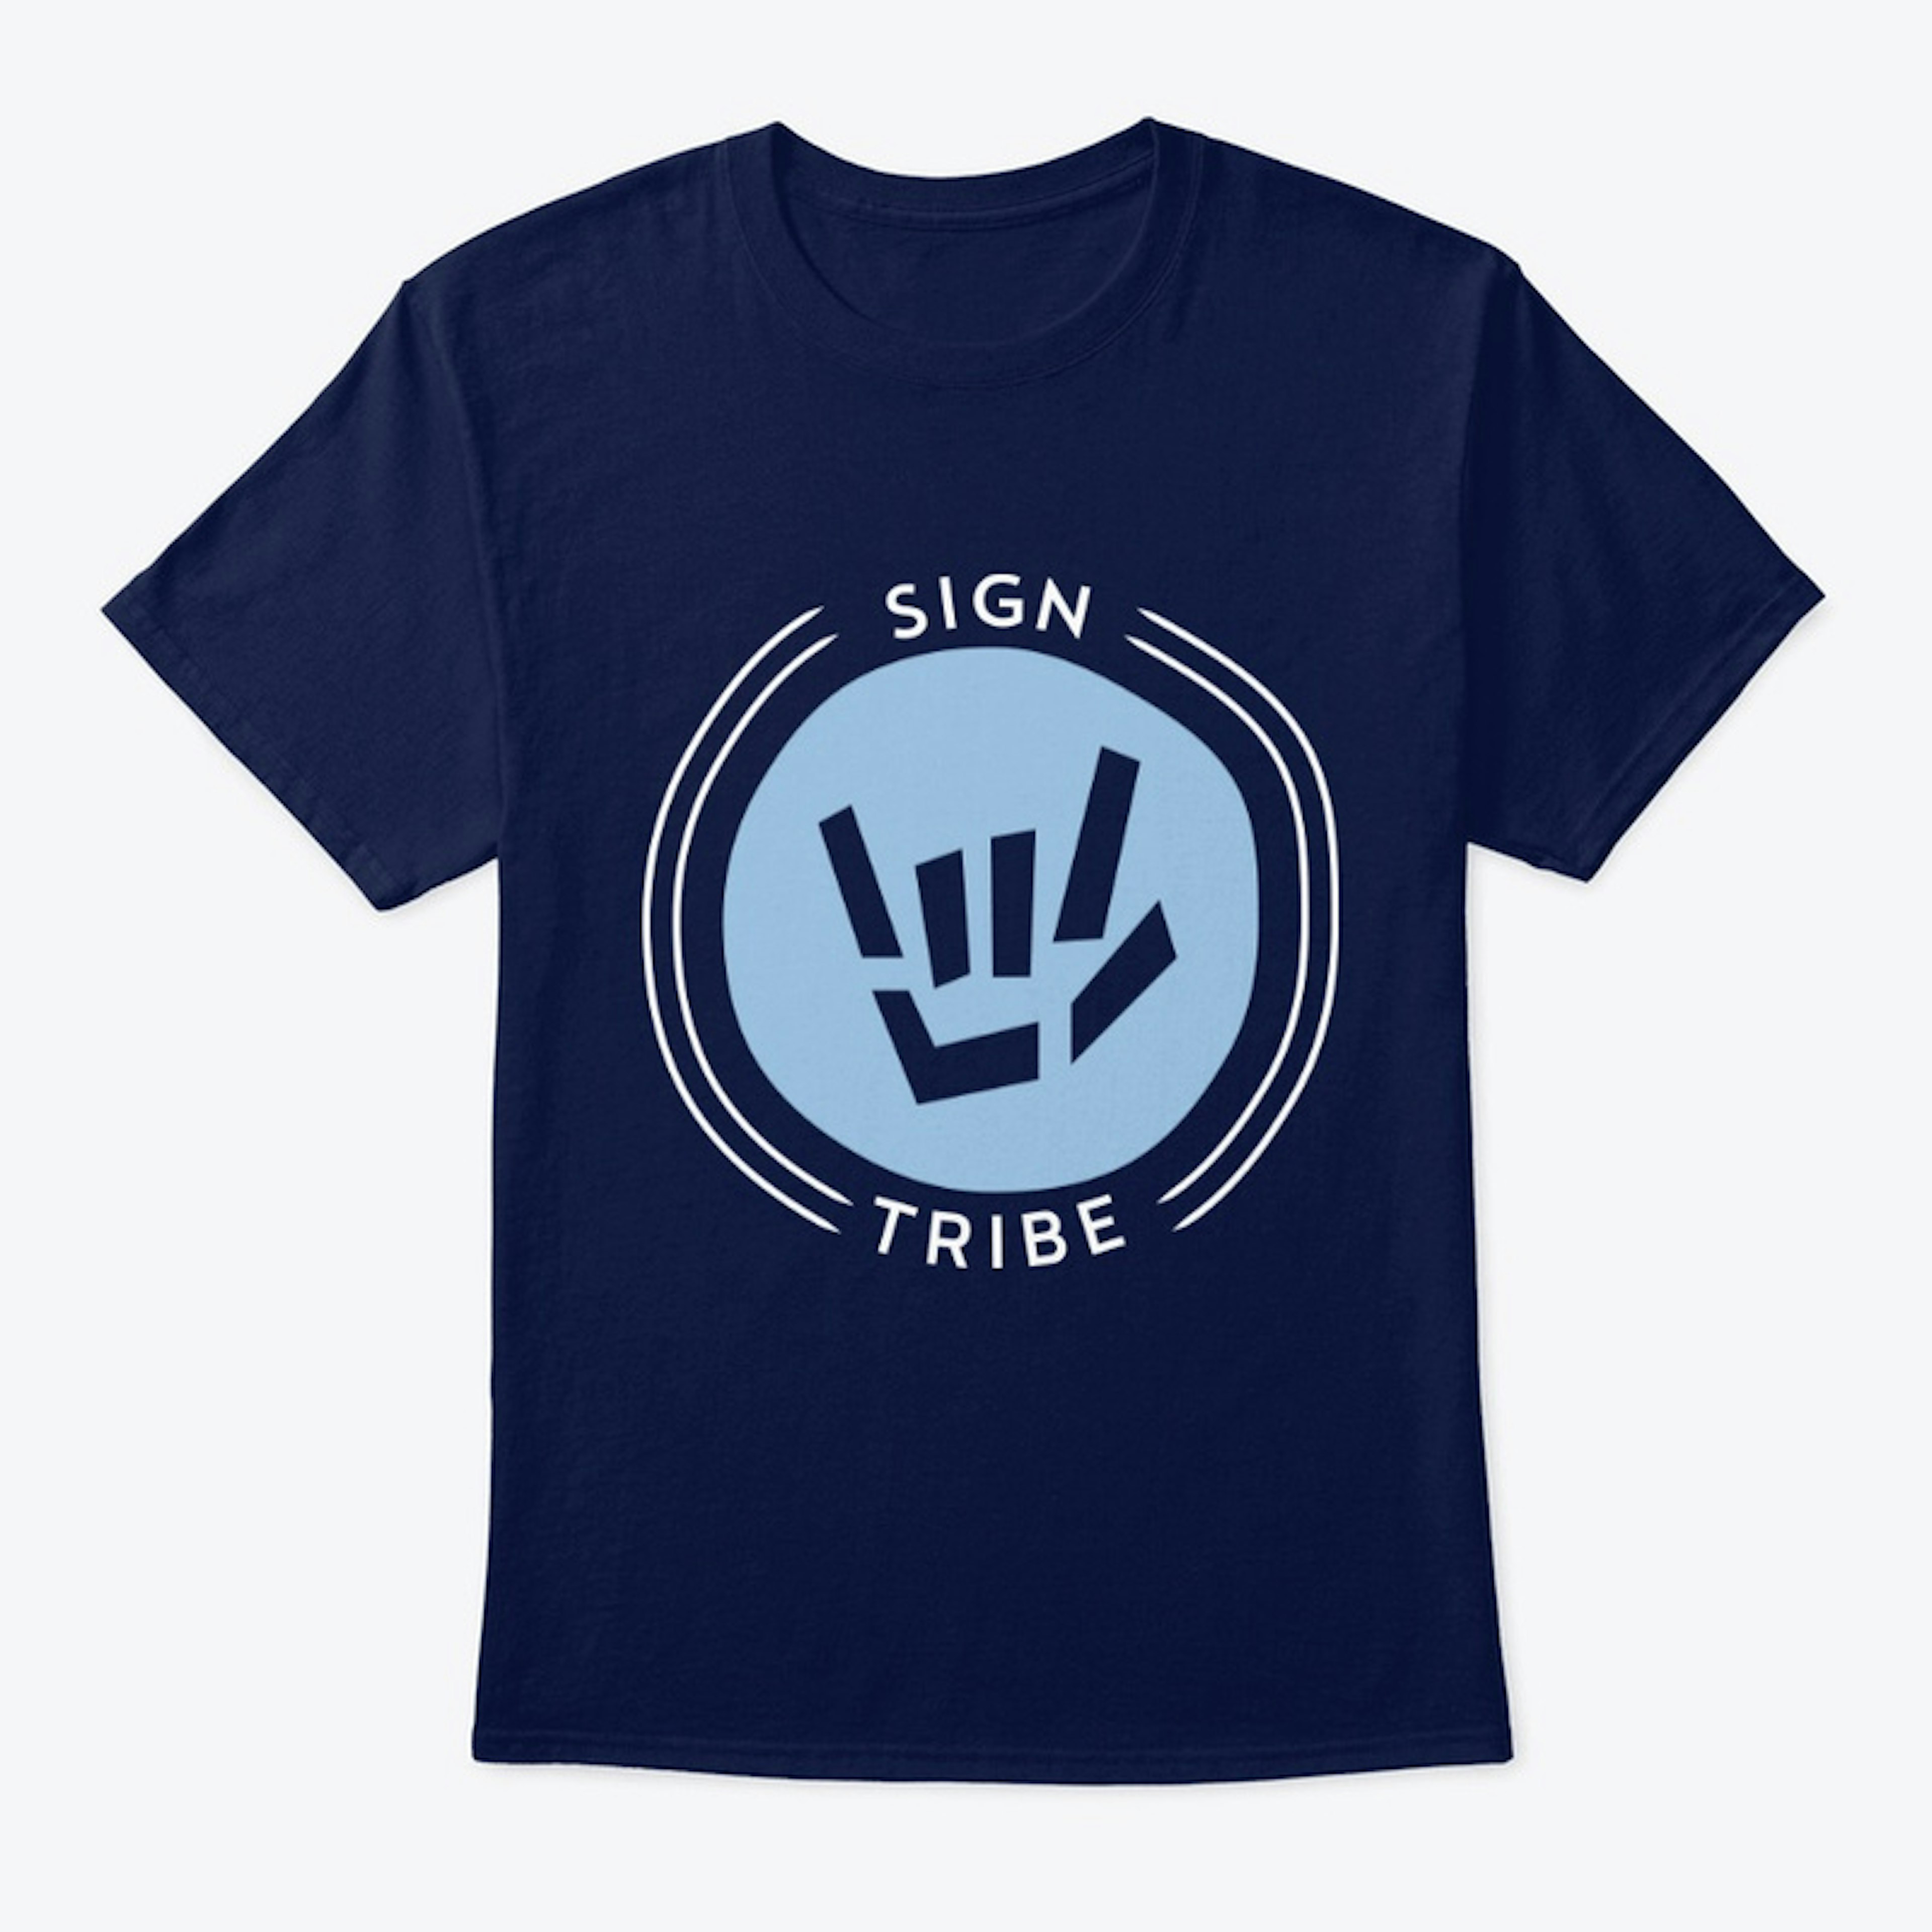 Sign Tribe Tee